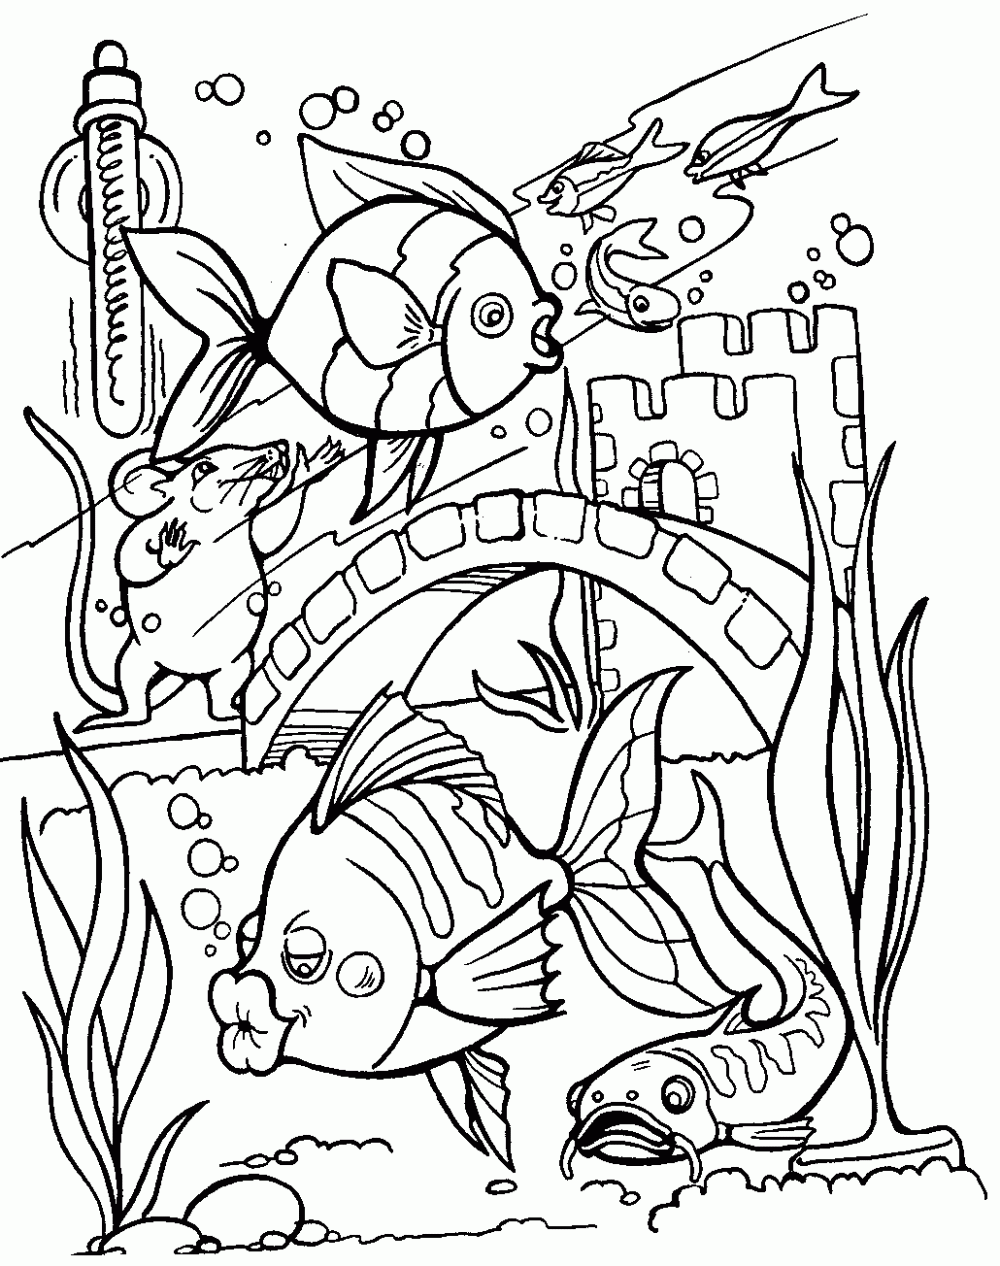 Tropical Fish Coloring Pages e1368610134915 Awesome Fish Coloring ...